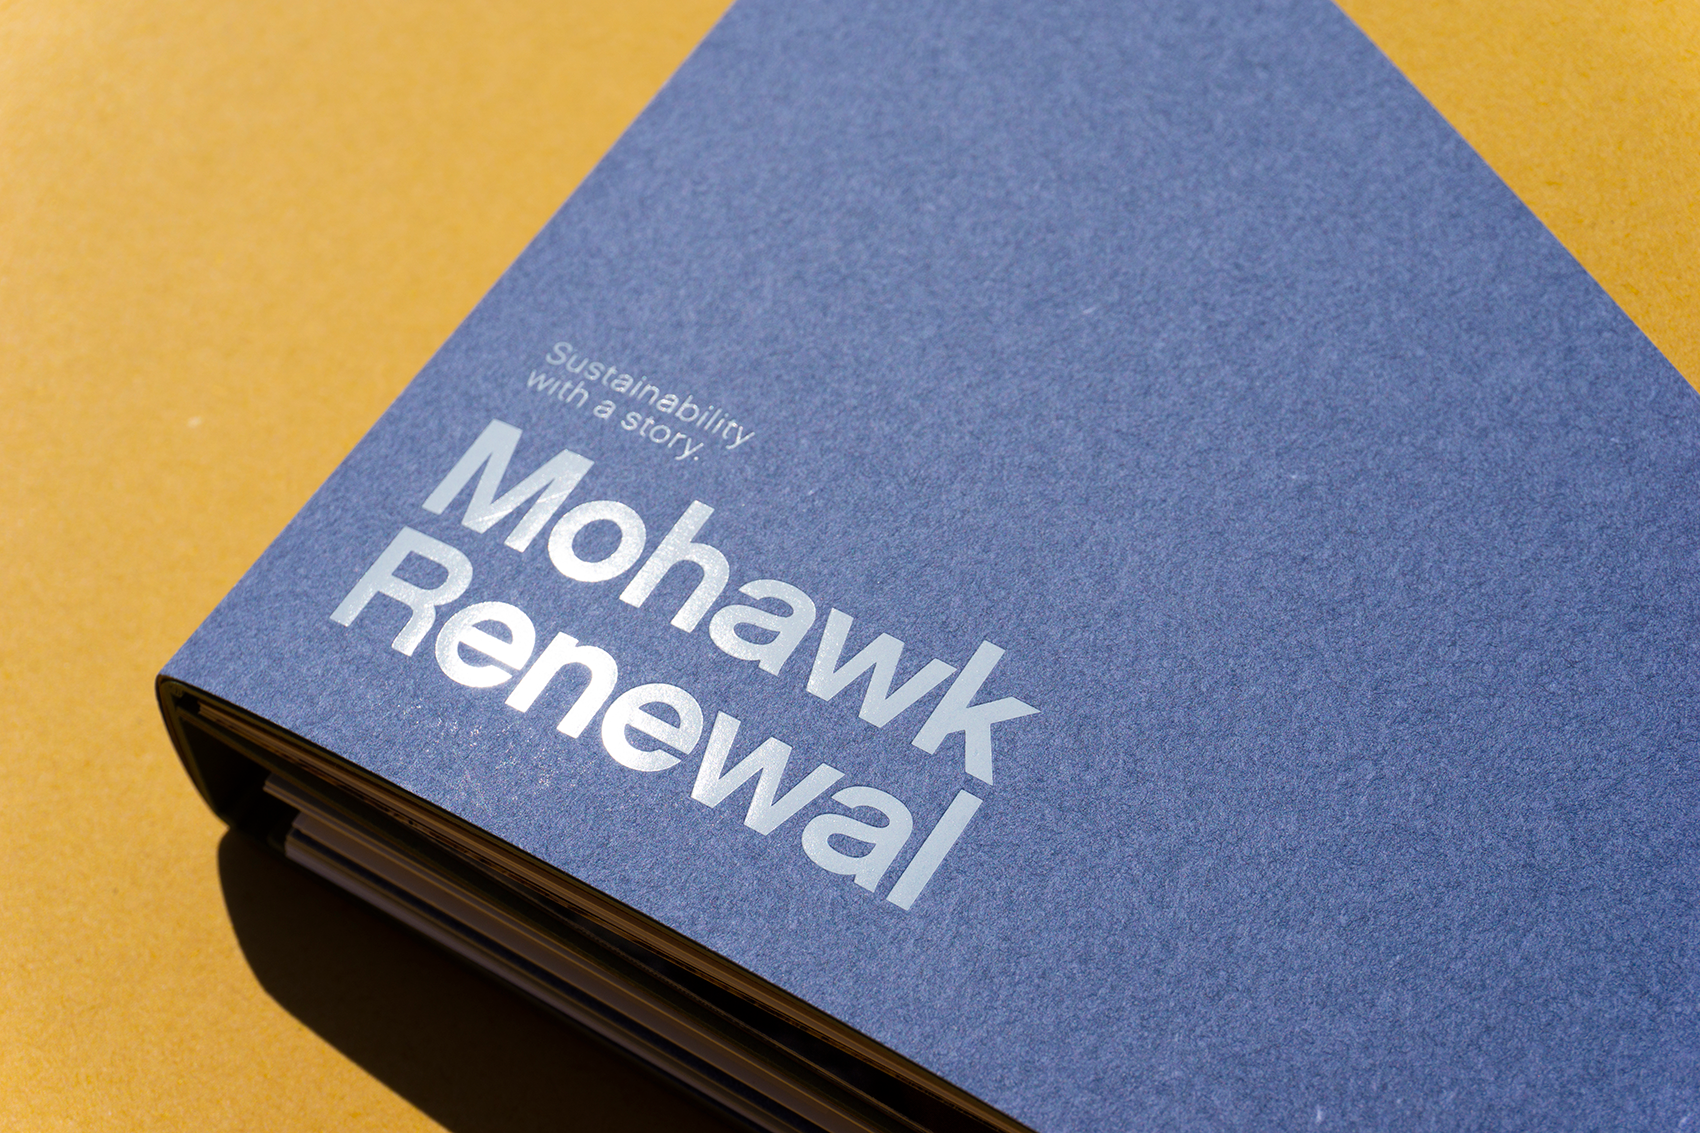 Close-up of Mohawk Renewal typography on cover